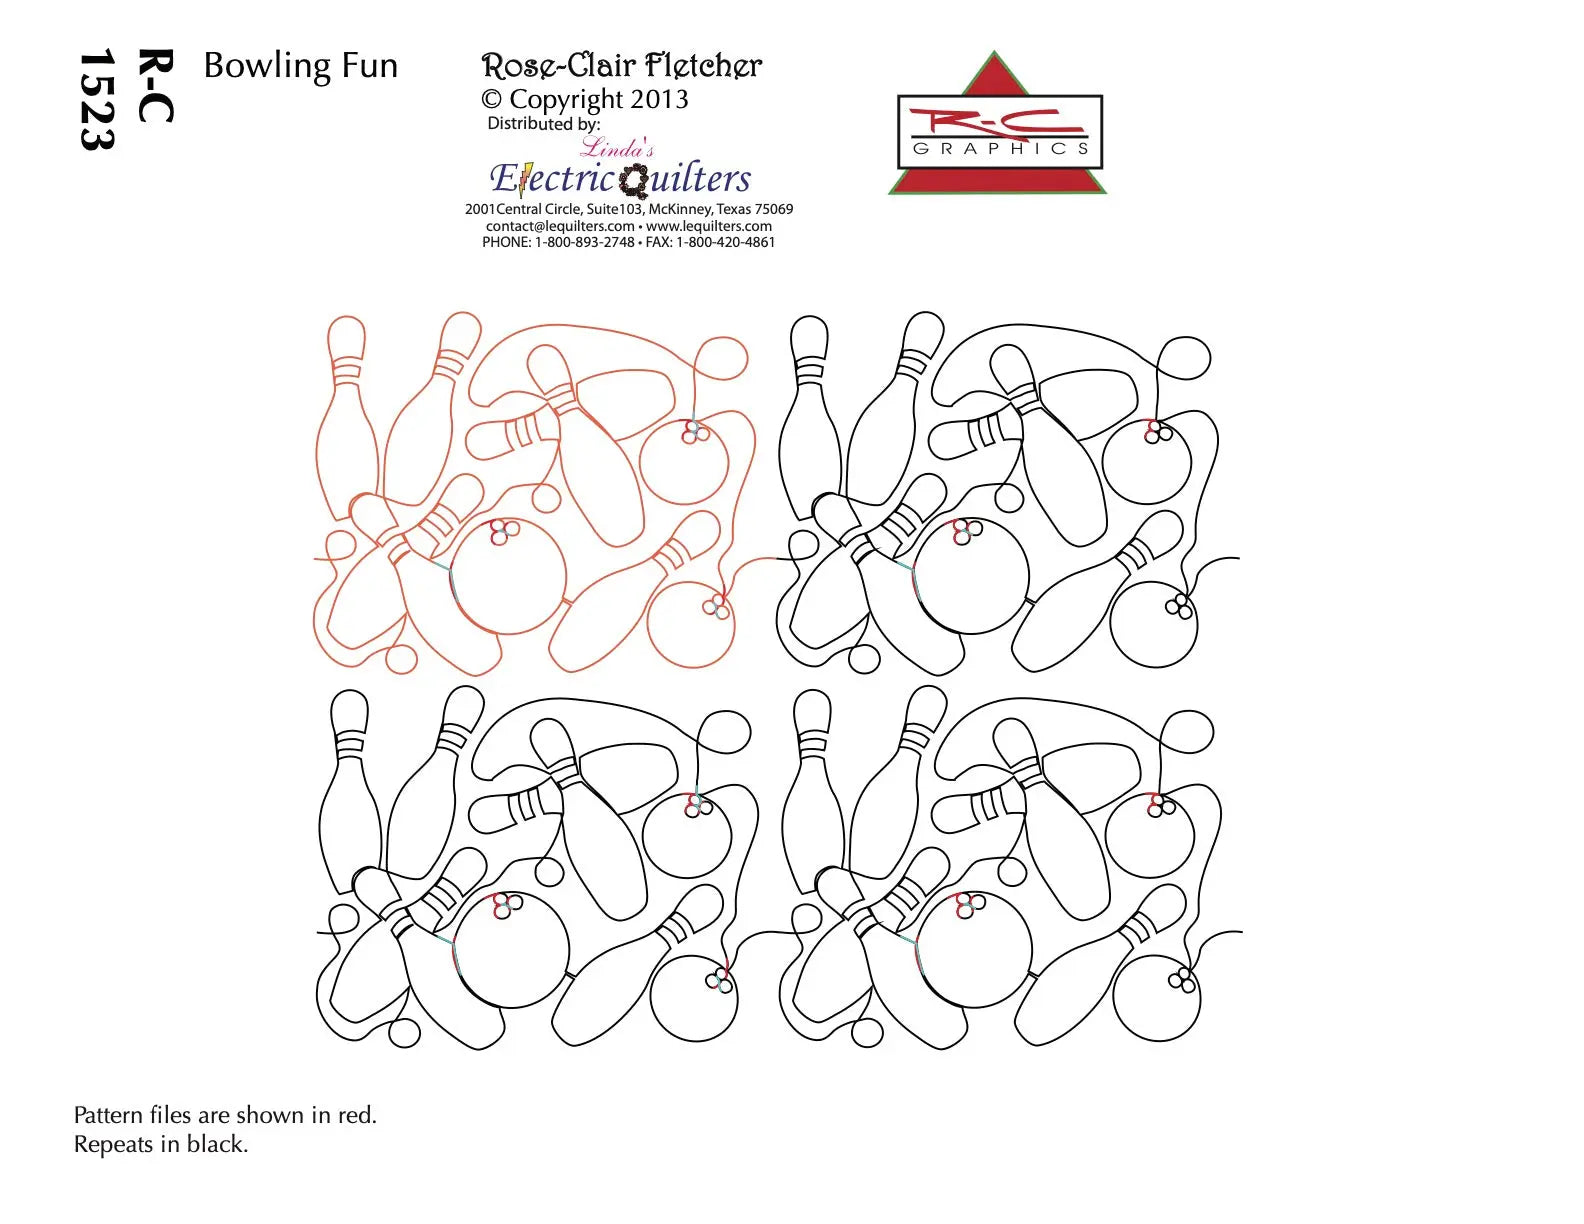 1523 Bowling Fun Pantograph by Rose-Clair Fletcher - Linda's Electric Quilters